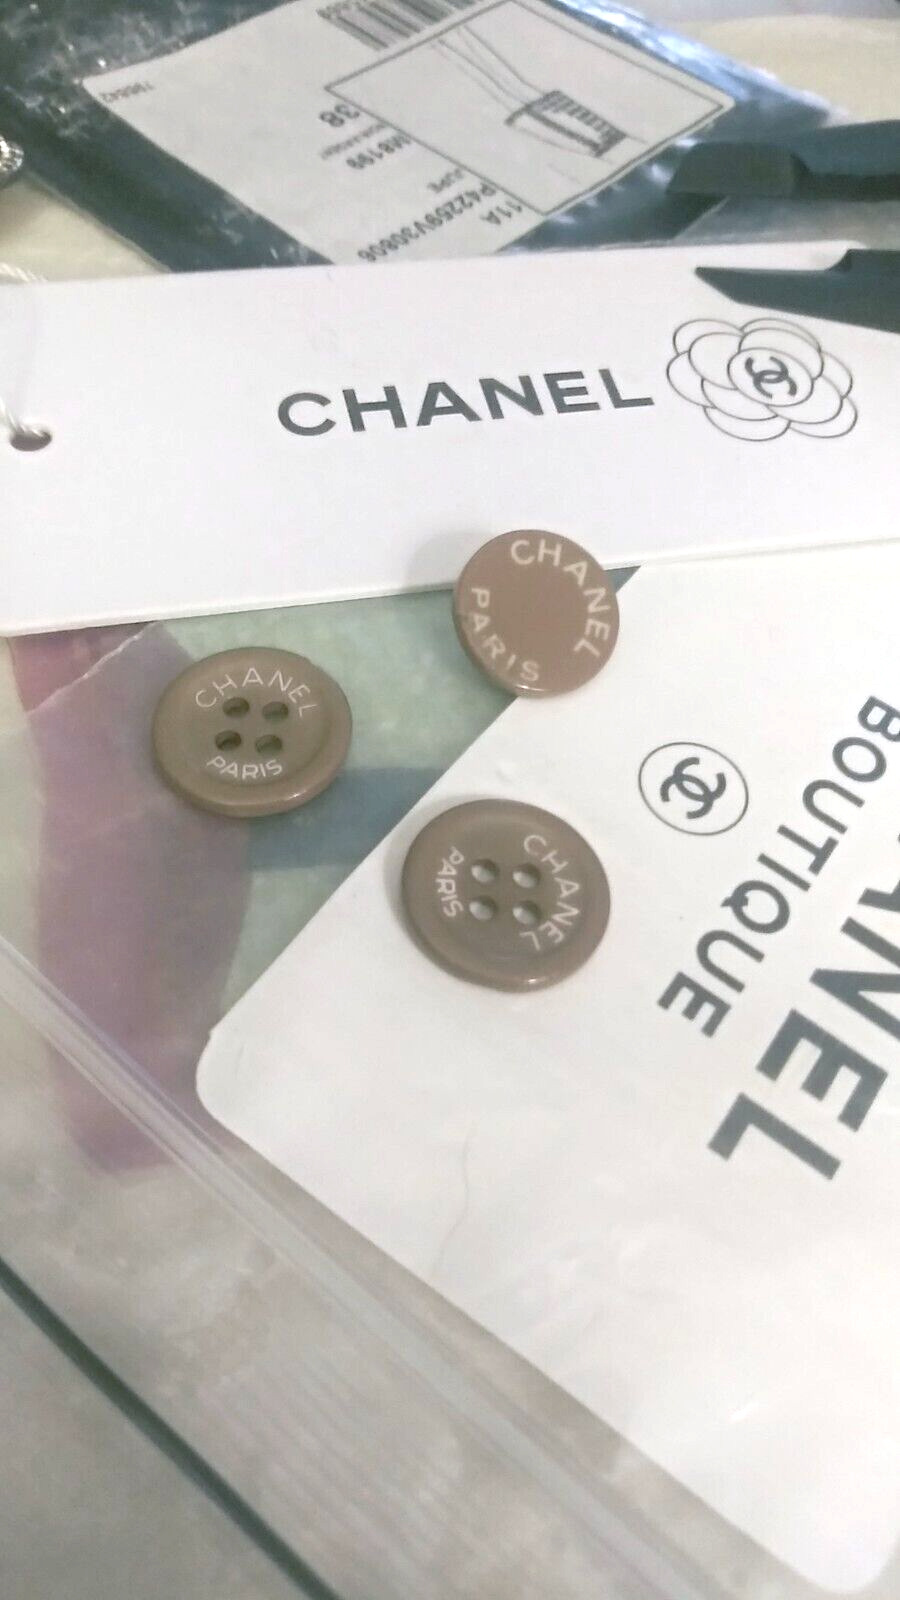 Authentic Chanel Button Lot of 3 Taupe/Brown resin buttons made in France